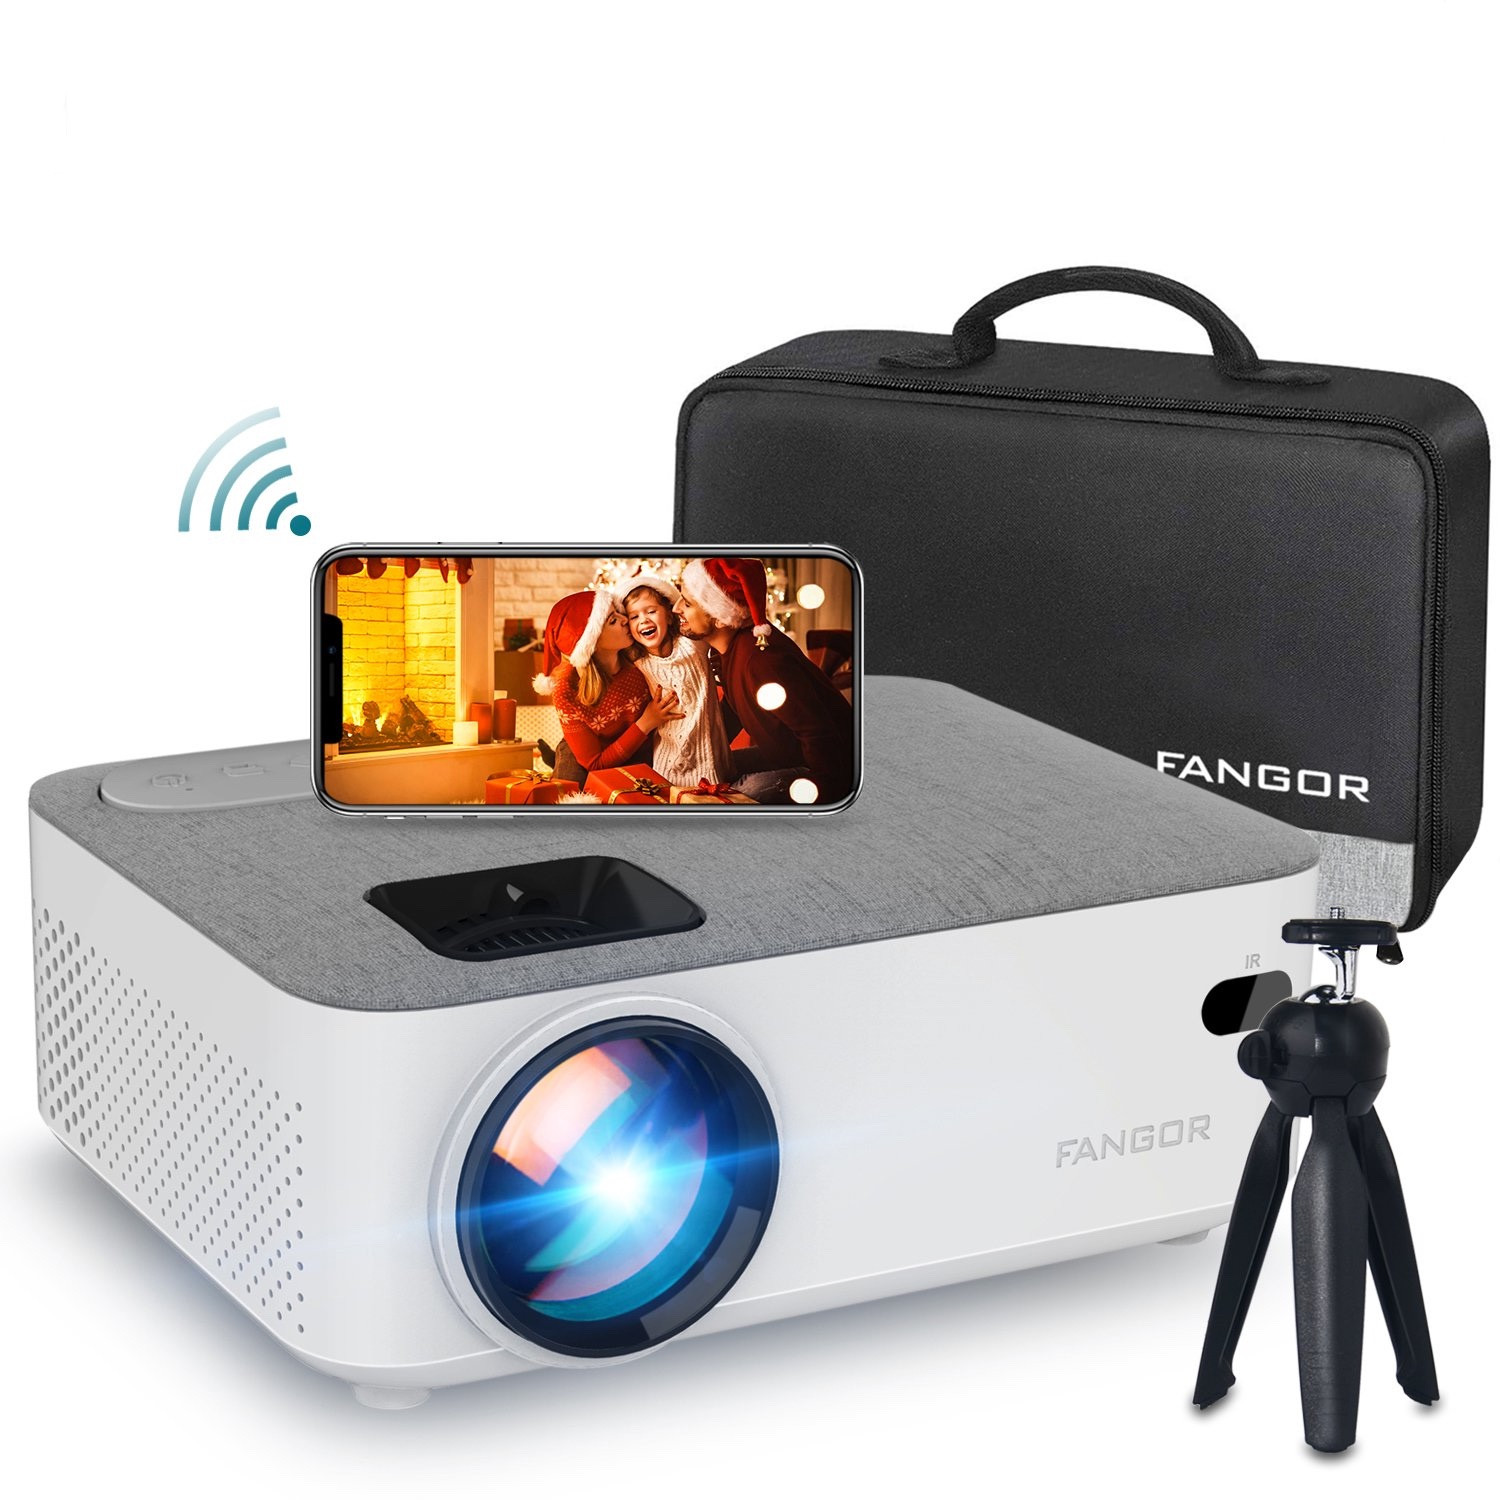 Fangor 206B Mini WiFi Projector, 1080p Support HD, Compatible with TV Stick, USB, Laptop, Free Projector Tripod Included